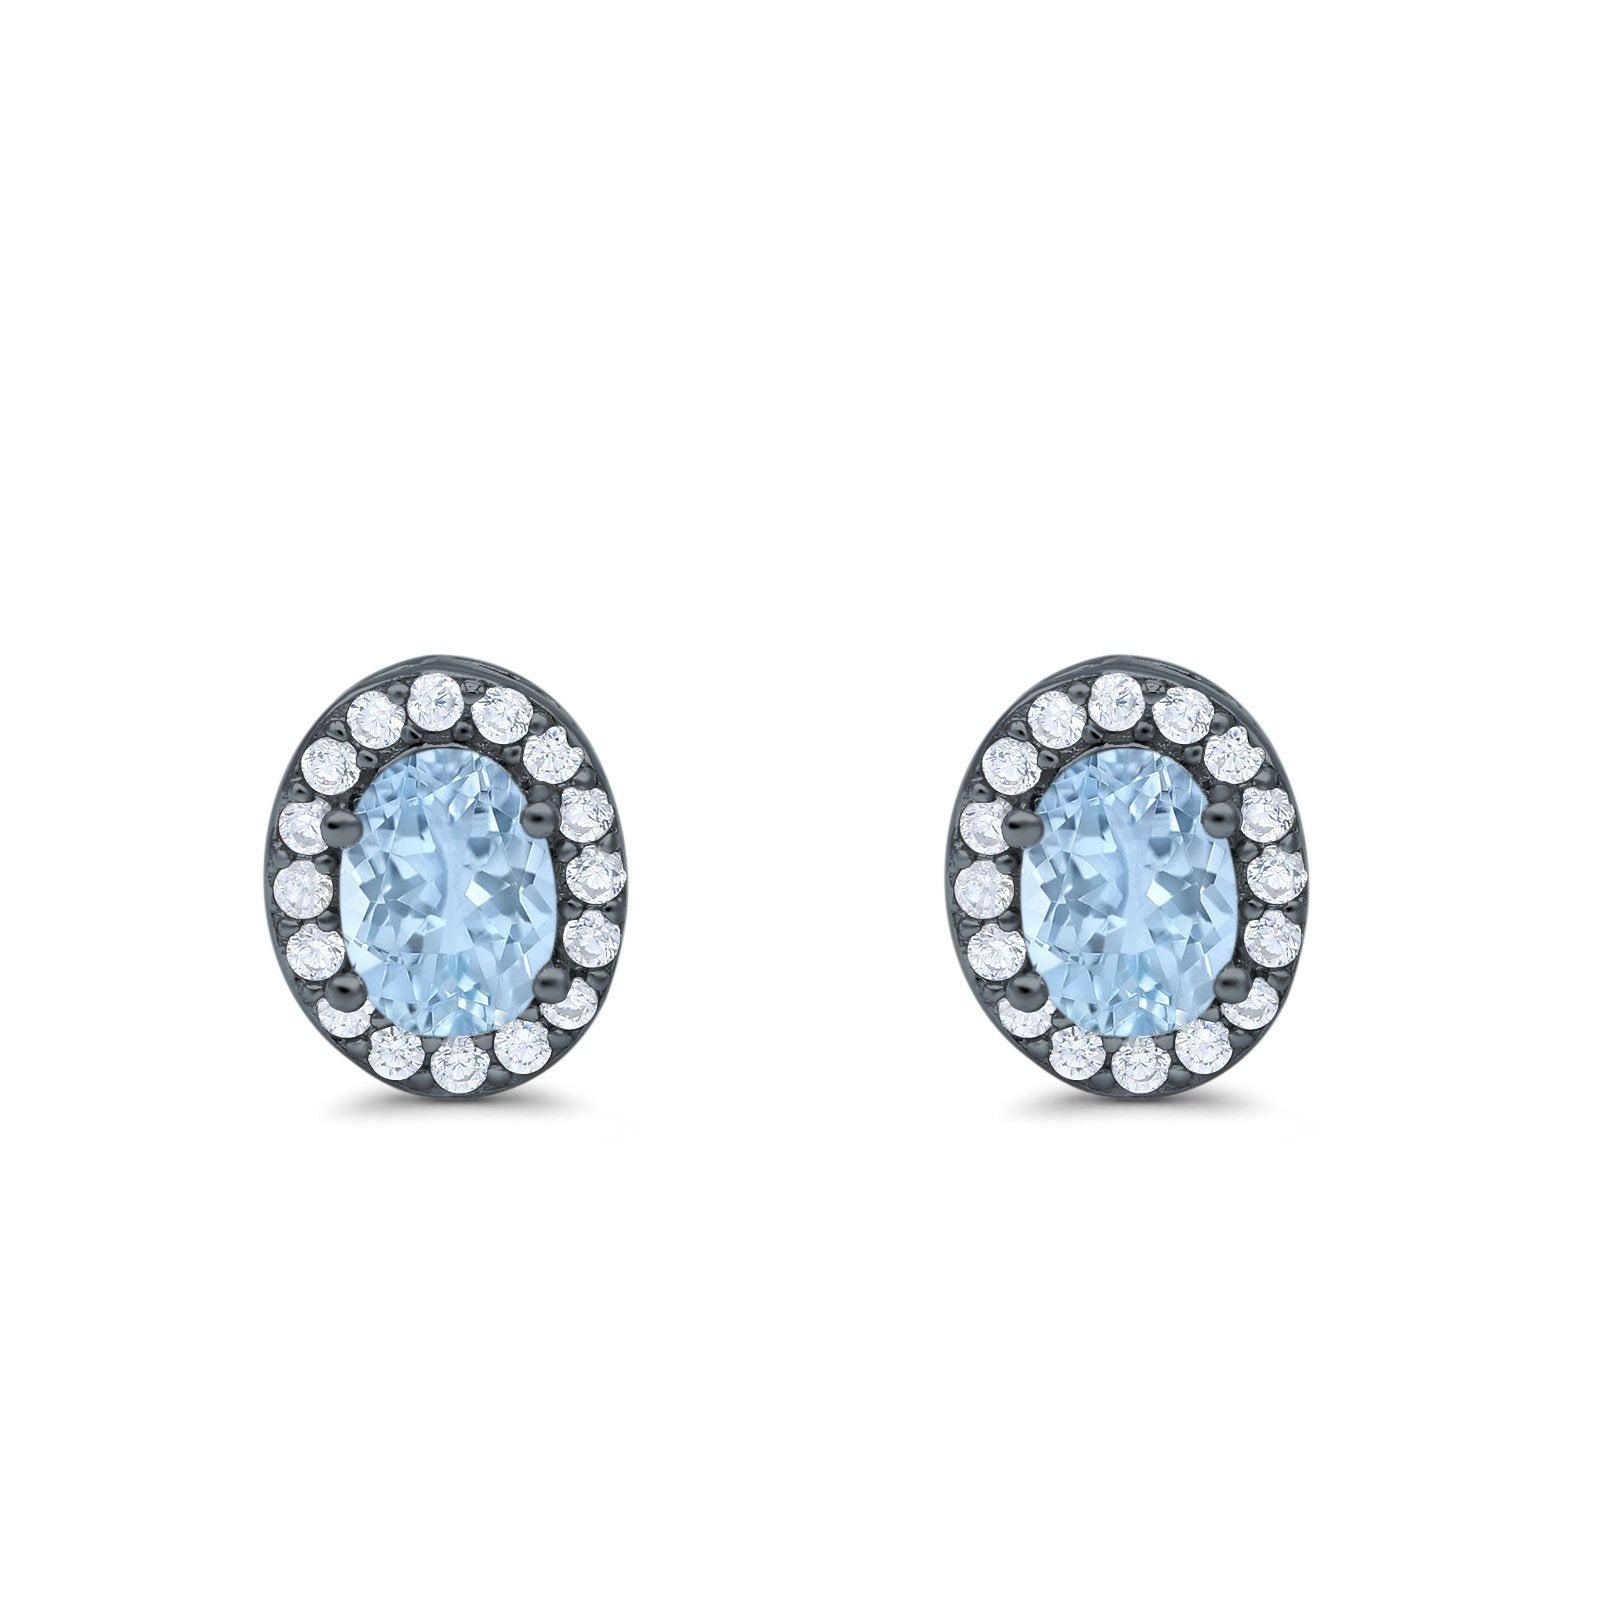 Stud Earrings Wedding Engagement Oval Simulated CZ 925 Sterling Silver (11mm)